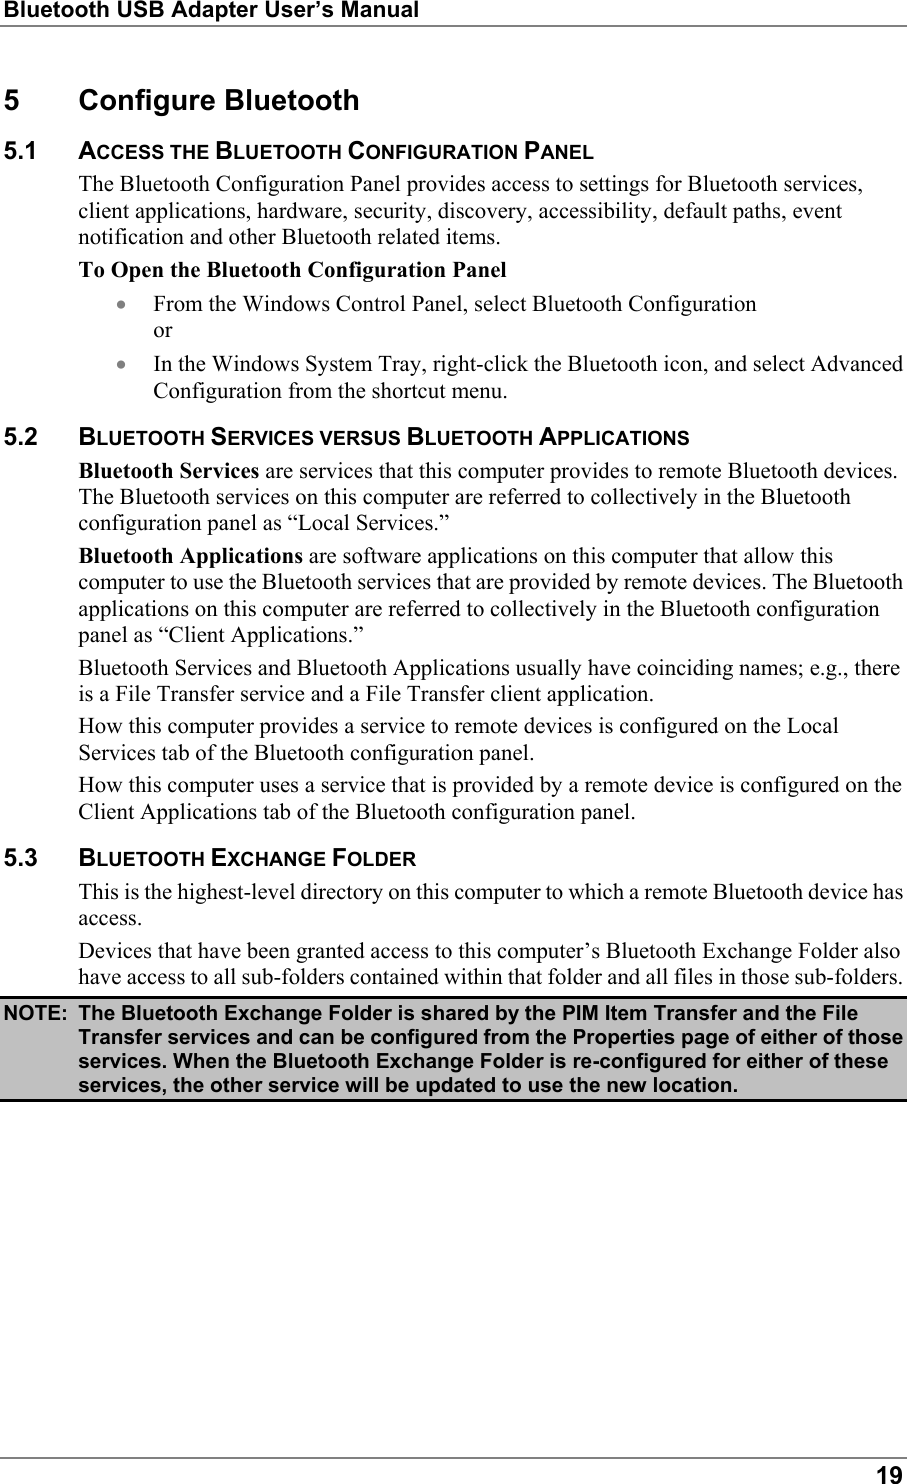 Bluetooth USB Adapter User’s Manual195 Configure Bluetooth5.1 ACCESS THE BLUETOOTH CONFIGURATION PANELThe Bluetooth Configuration Panel provides access to settings for Bluetooth services,client applications, hardware, security, discovery, accessibility, default paths, eventnotification and other Bluetooth related items.To Open the Bluetooth Configuration Panel• From the Windows Control Panel, select Bluetooth Configurationor• In the Windows System Tray, right-click the Bluetooth icon, and select AdvancedConfiguration from the shortcut menu.5.2 BLUETOOTH SERVICES VERSUS BLUETOOTH APPLICATIONSBluetooth Services are services that this computer provides to remote Bluetooth devices.The Bluetooth services on this computer are referred to collectively in the Bluetoothconfiguration panel as “Local Services.”Bluetooth Applications are software applications on this computer that allow thiscomputer to use the Bluetooth services that are provided by remote devices. The Bluetoothapplications on this computer are referred to collectively in the Bluetooth configurationpanel as “Client Applications.”Bluetooth Services and Bluetooth Applications usually have coinciding names; e.g., thereis a File Transfer service and a File Transfer client application.How this computer provides a service to remote devices is configured on the LocalServices tab of the Bluetooth configuration panel.How this computer uses a service that is provided by a remote device is configured on theClient Applications tab of the Bluetooth configuration panel.5.3 BLUETOOTH EXCHANGE FOLDERThis is the highest-level directory on this computer to which a remote Bluetooth device hasaccess.Devices that have been granted access to this computer’s Bluetooth Exchange Folder alsohave access to all sub-folders contained within that folder and all files in those sub-folders.NOTE: The Bluetooth Exchange Folder is shared by the PIM Item Transfer and the FileTransfer services and can be configured from the Properties page of either of thoseservices. When the Bluetooth Exchange Folder is re-configured for either of theseservices, the other service will be updated to use the new location.